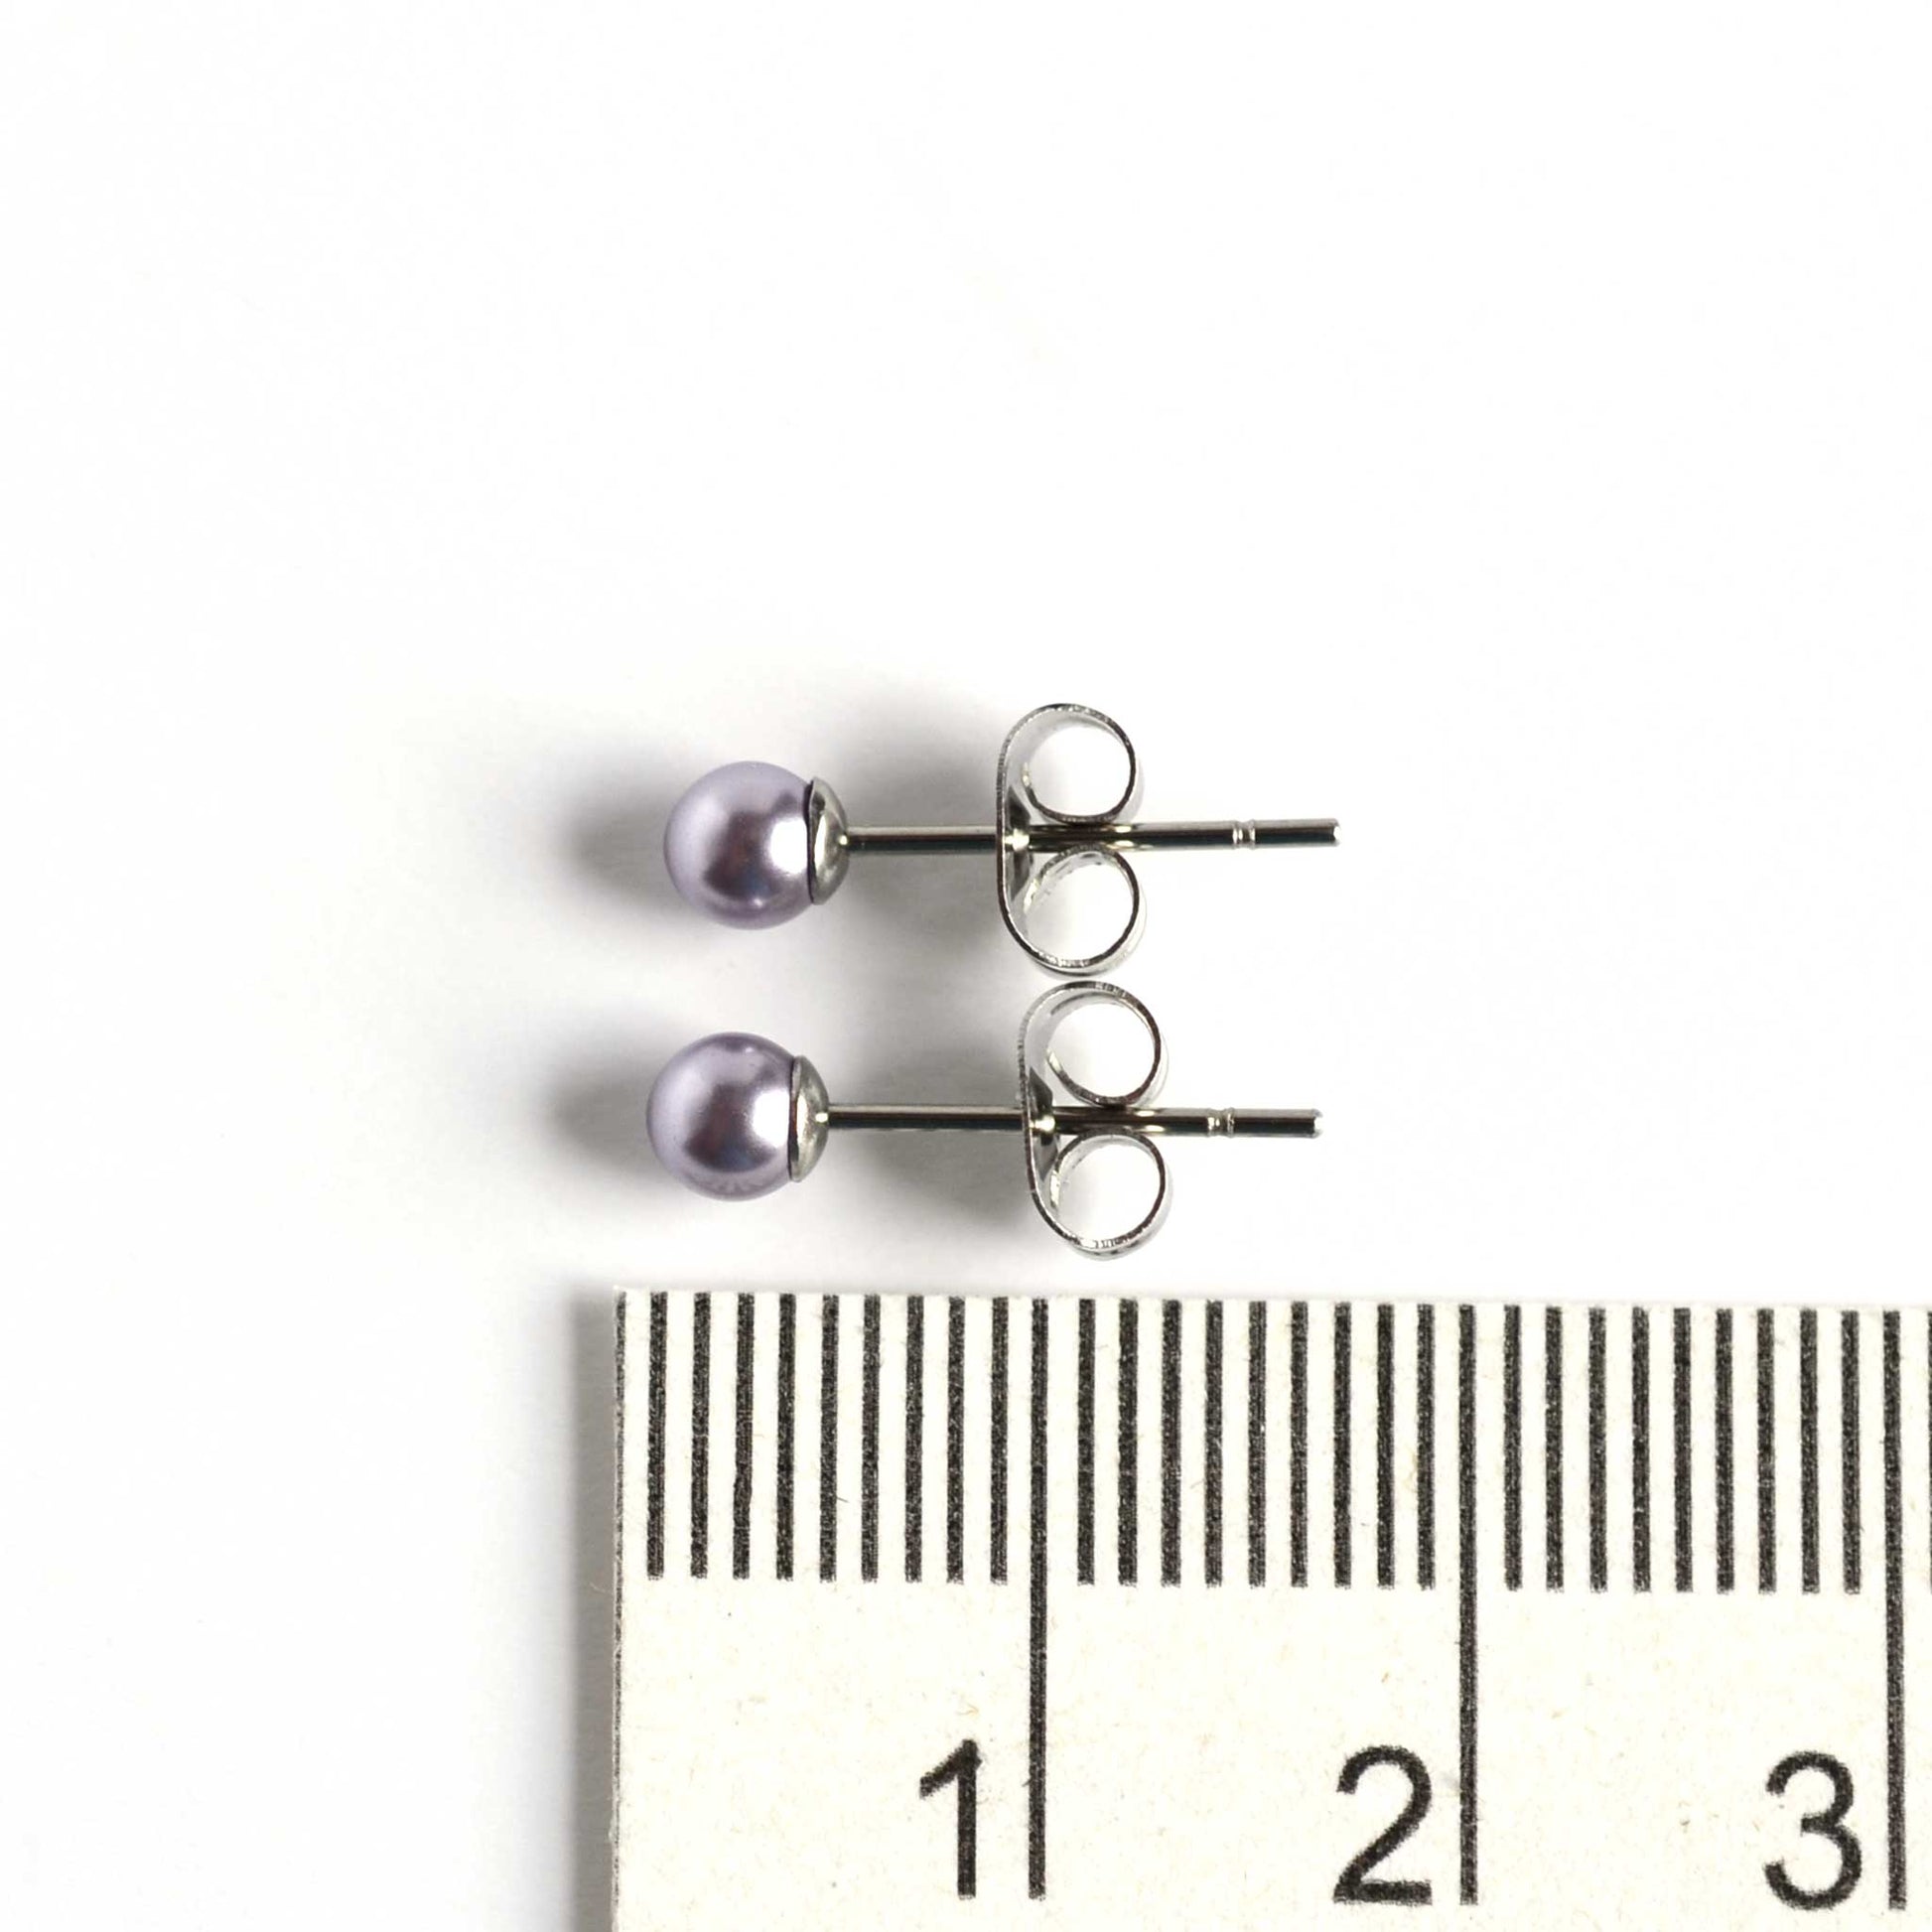 4mm light grey faux pearl stud earrings next to ruler as size guide